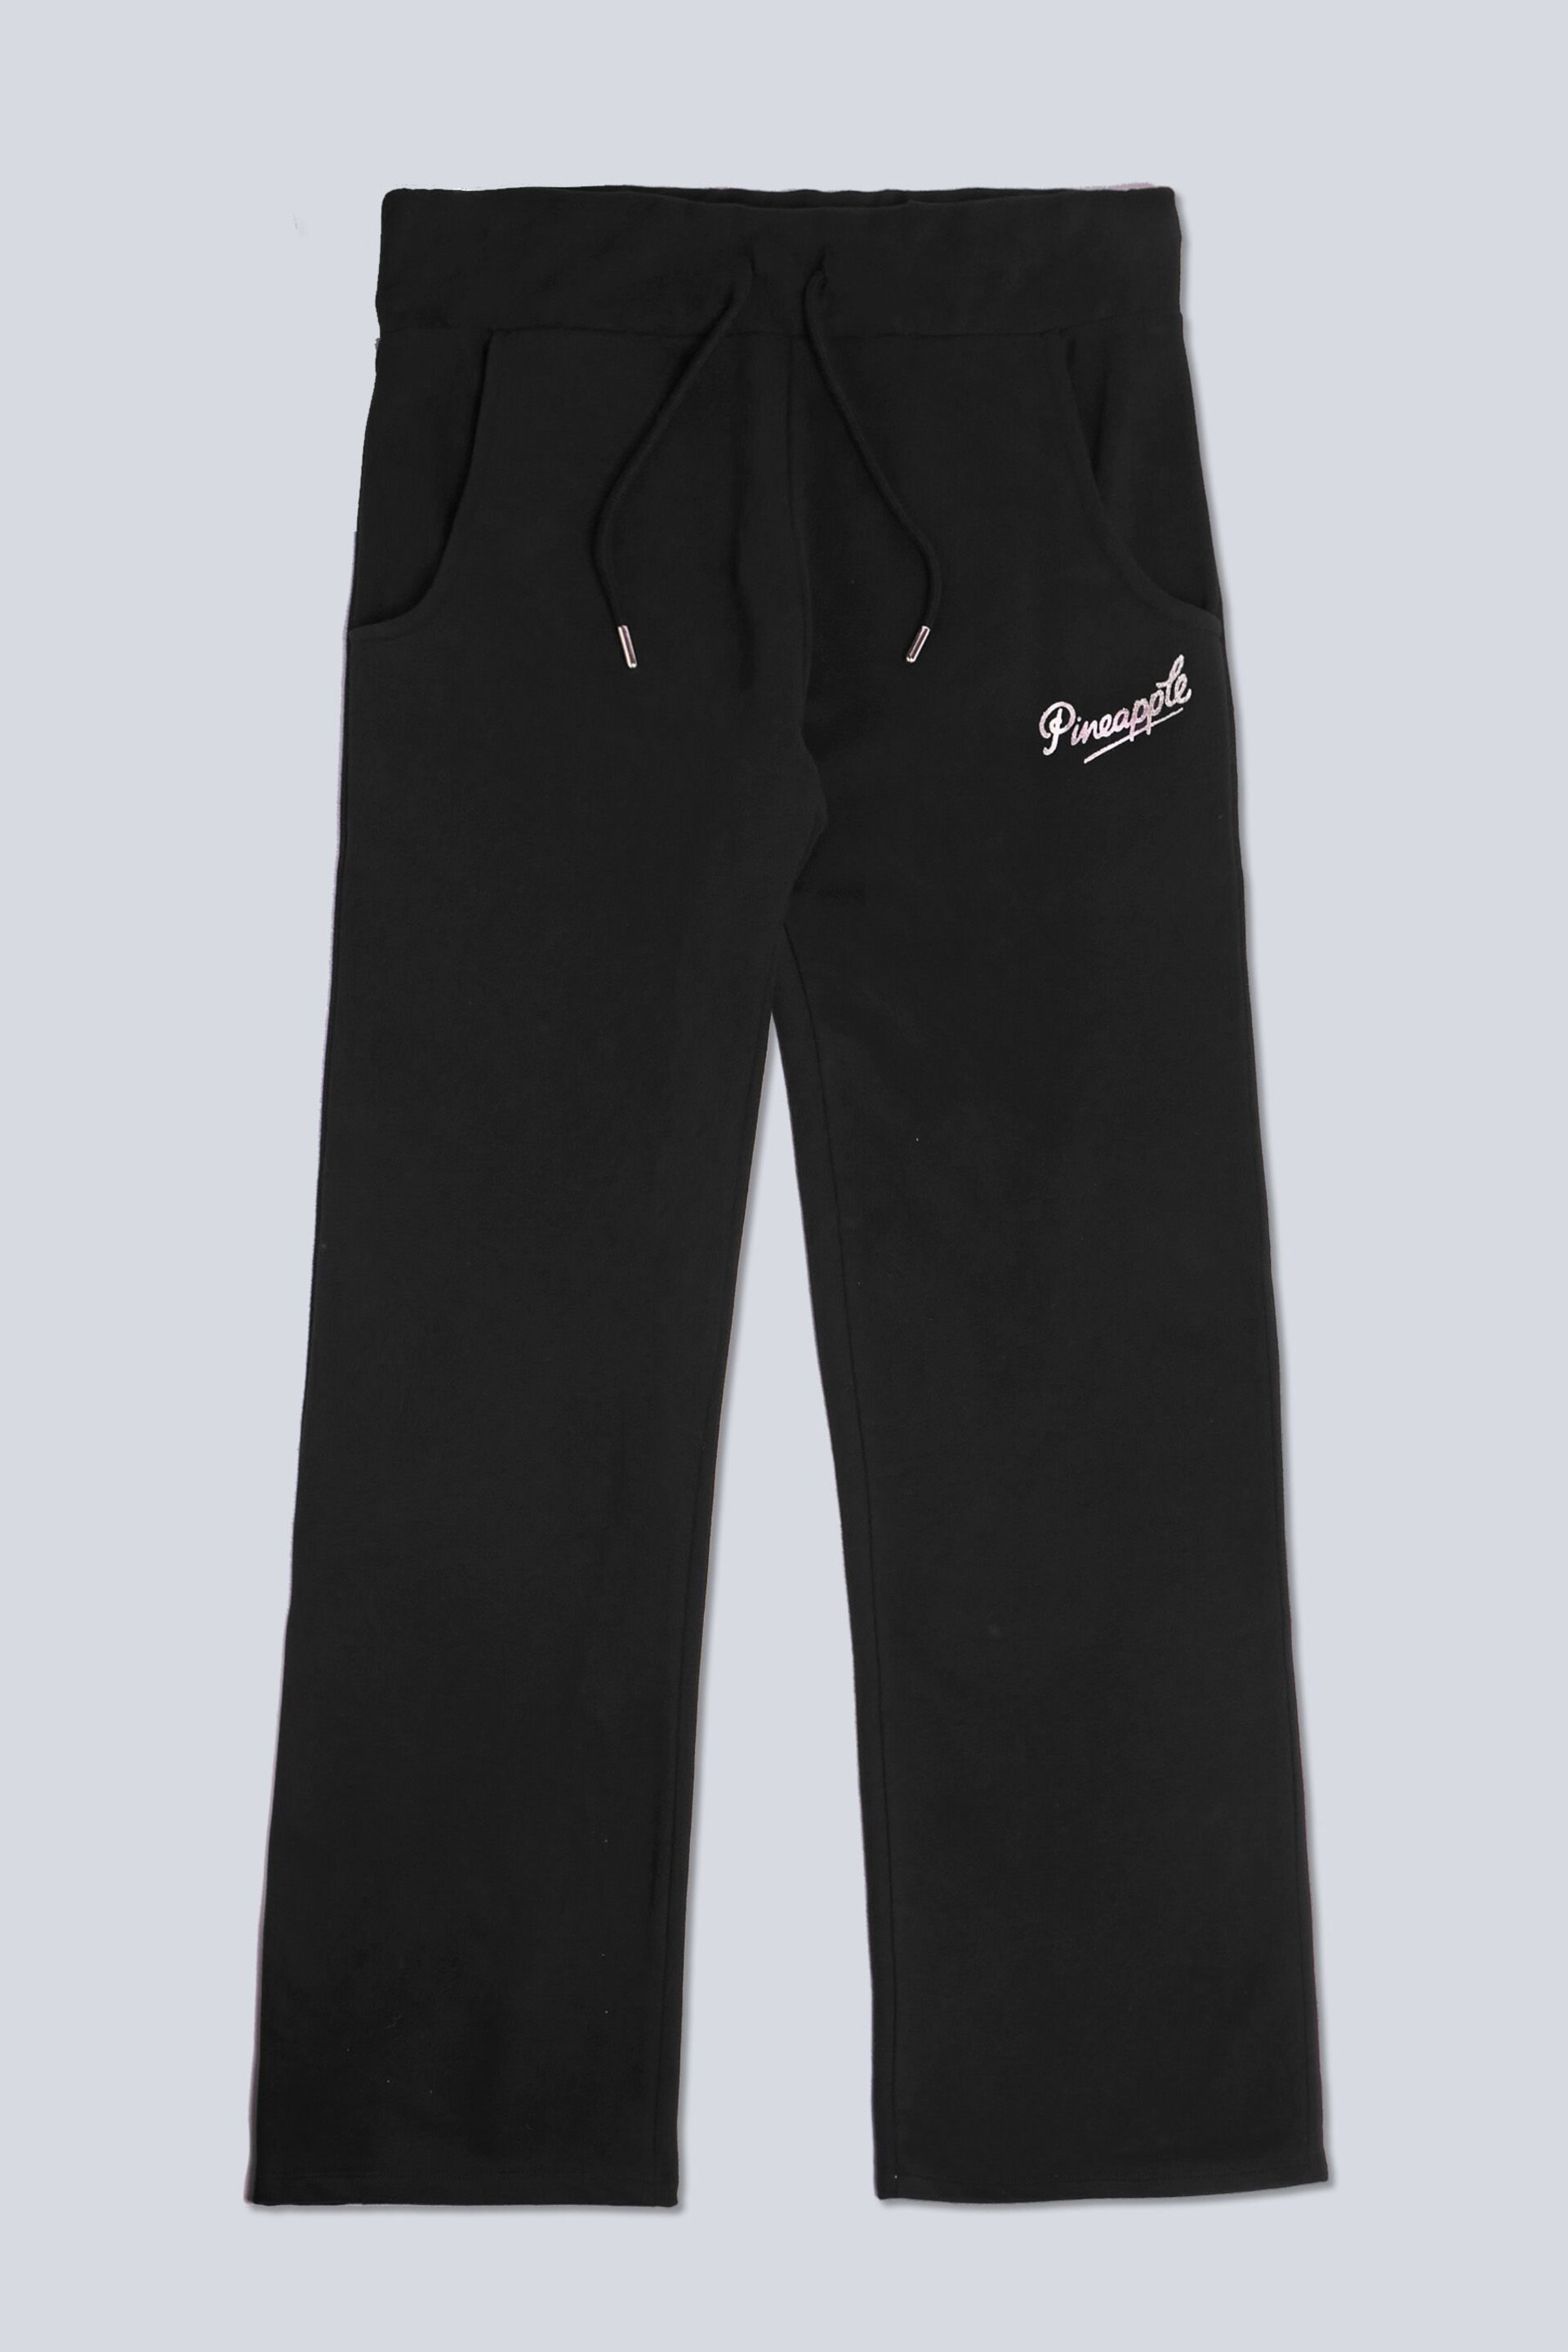 Pineapple Black Essential Womens Wide Leg Joggers - Image 6 of 6